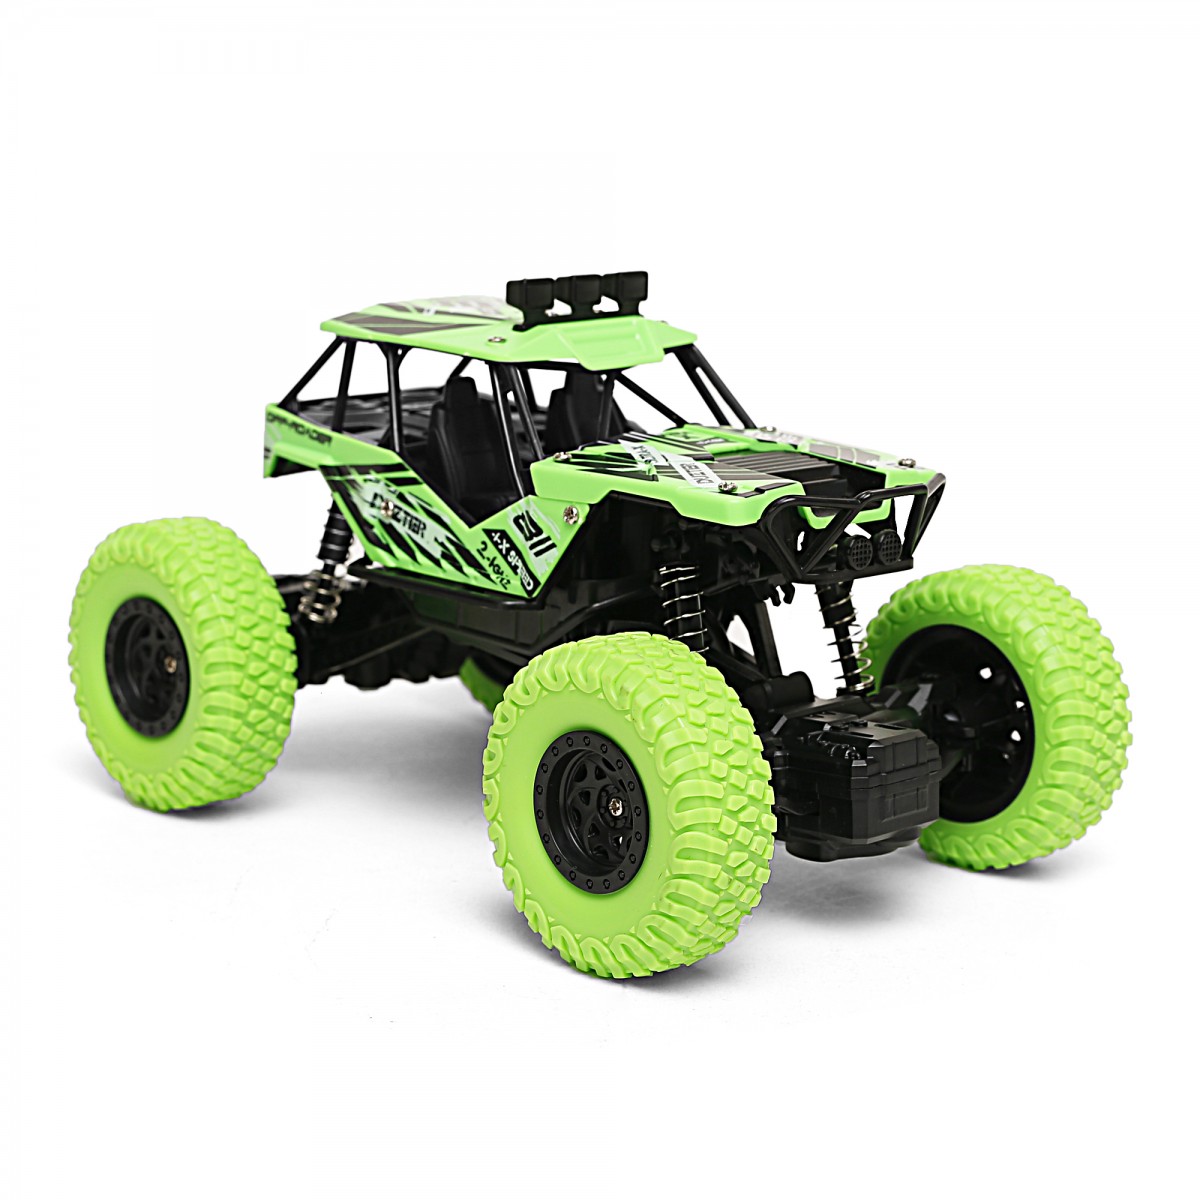 Ralleyz 1:20 Off Road Rc Car With 2.4 Ghz Remote Control 3.7V Rechargeable Battery Green 4Y+